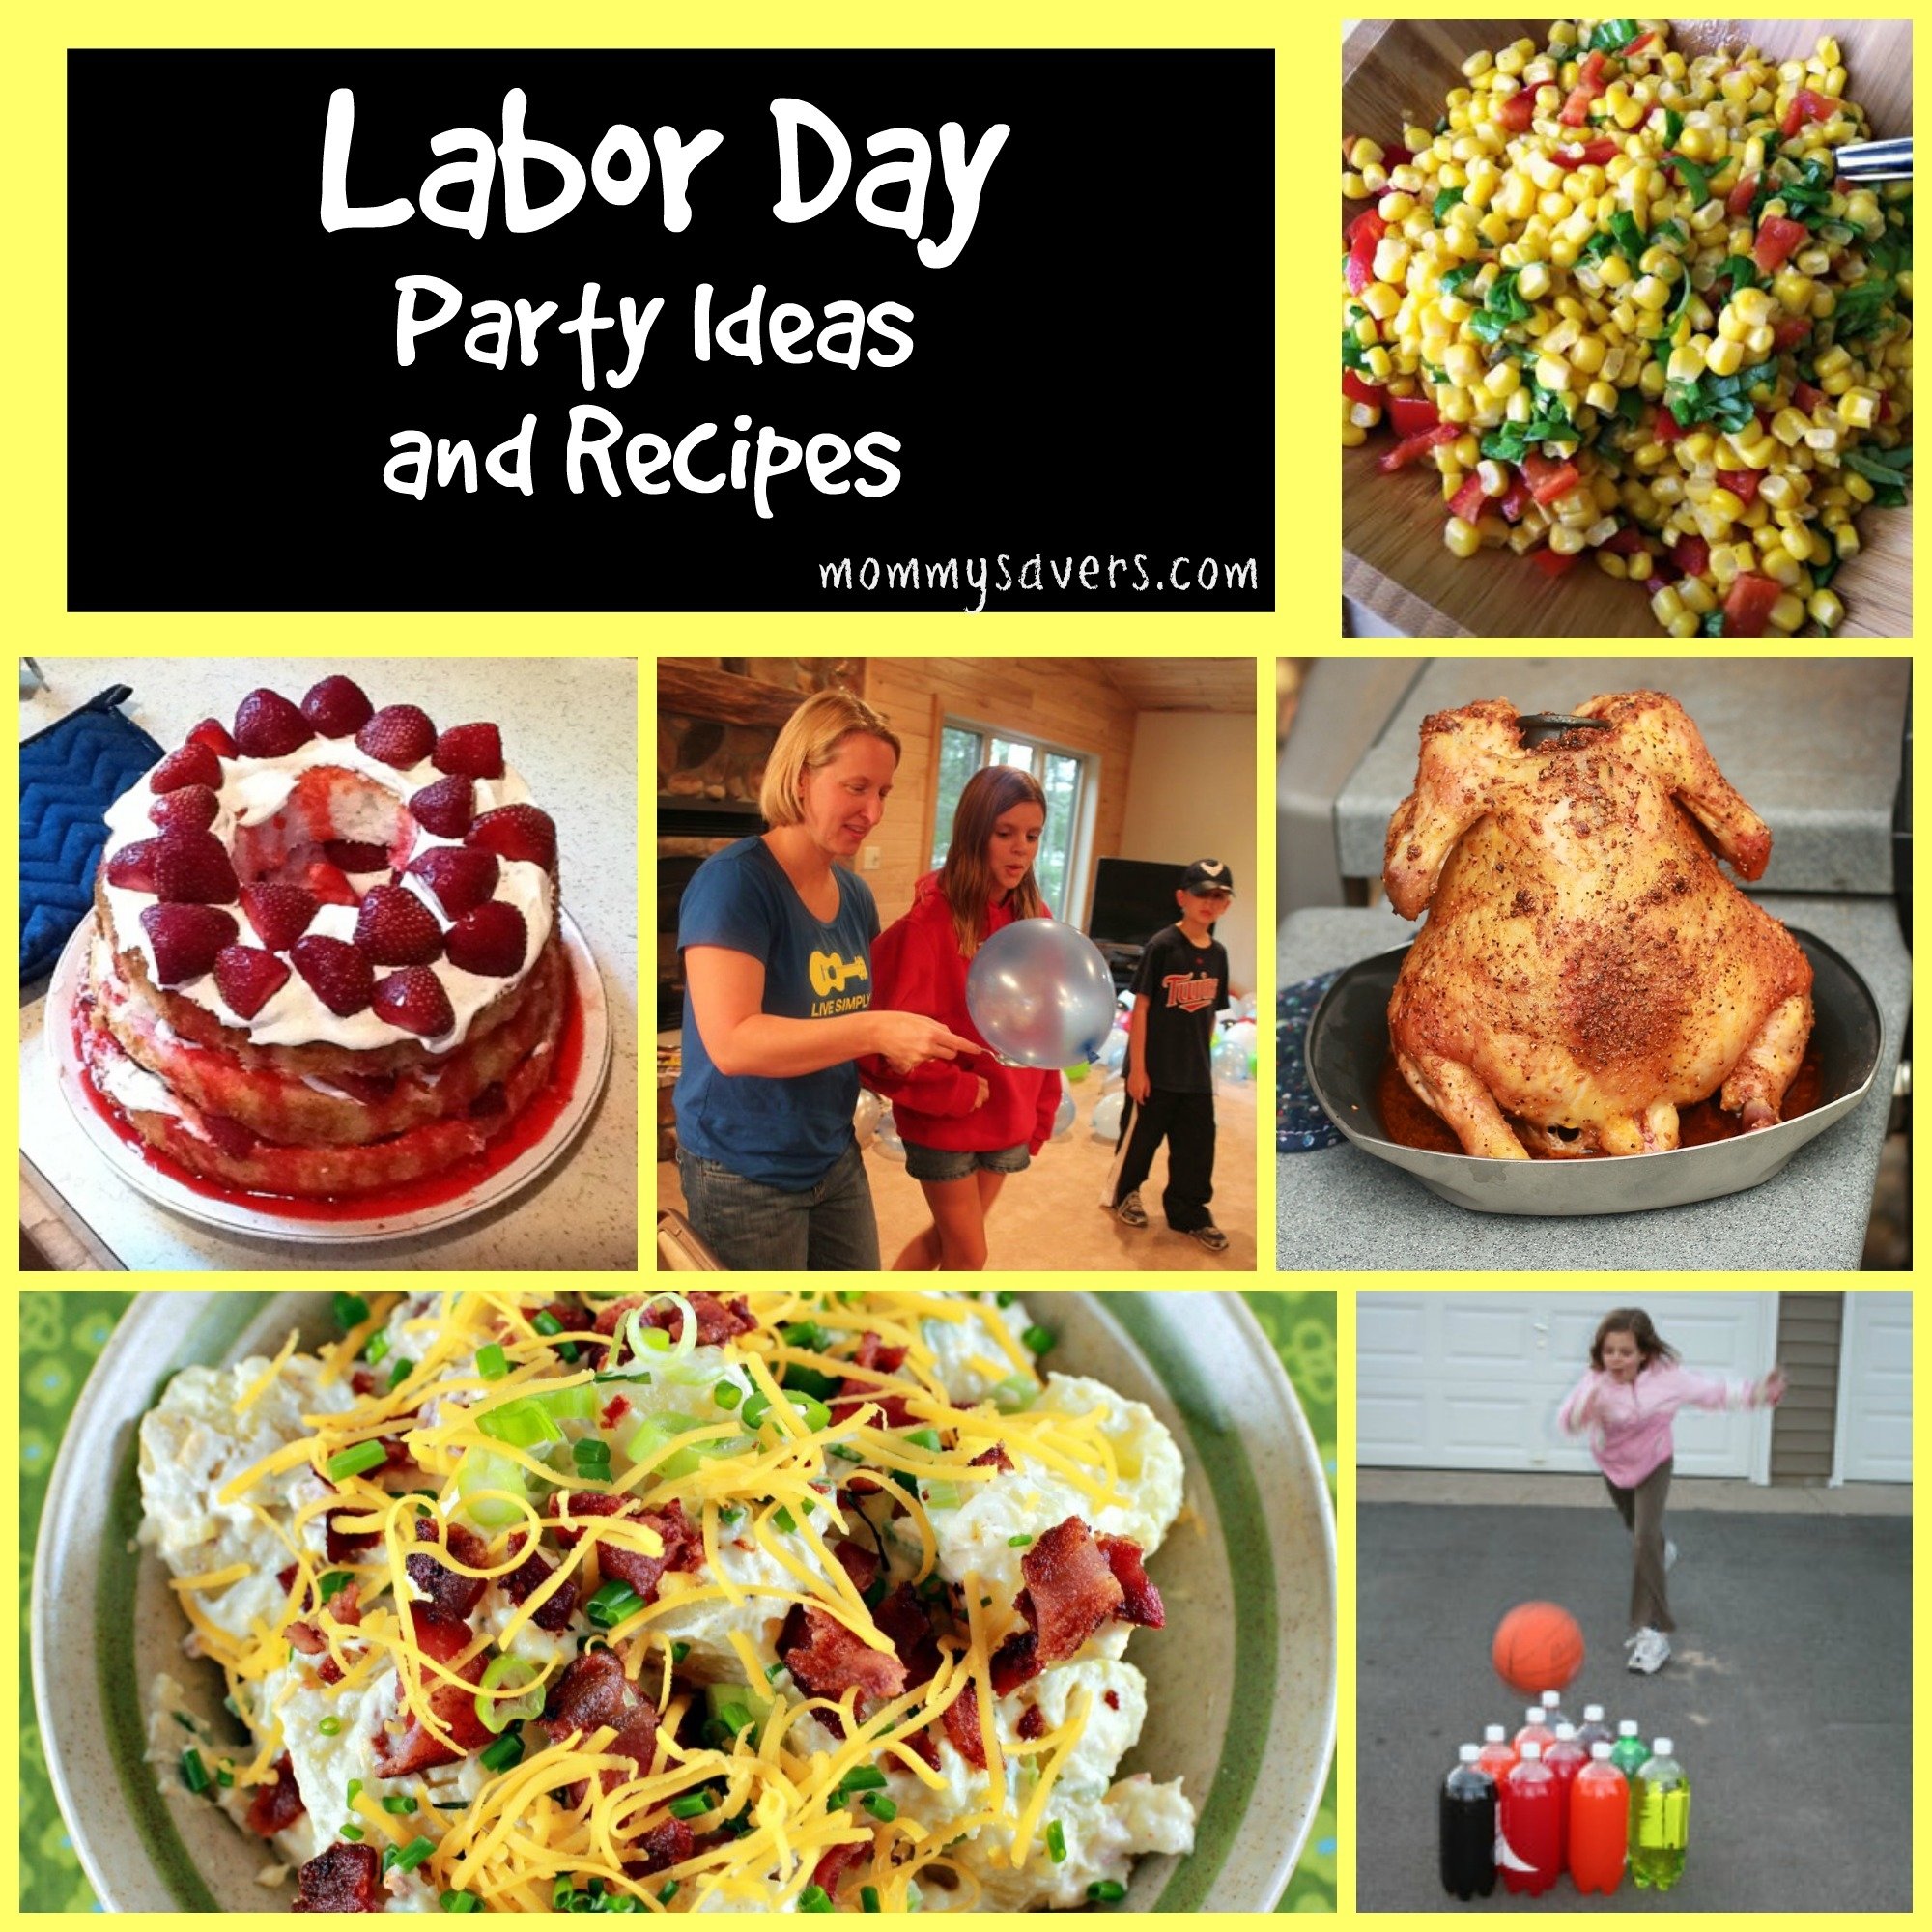 10 Pretty Ideas For Labor Day Weekend labor day party ideas and 25 recipes mommysavers 2022